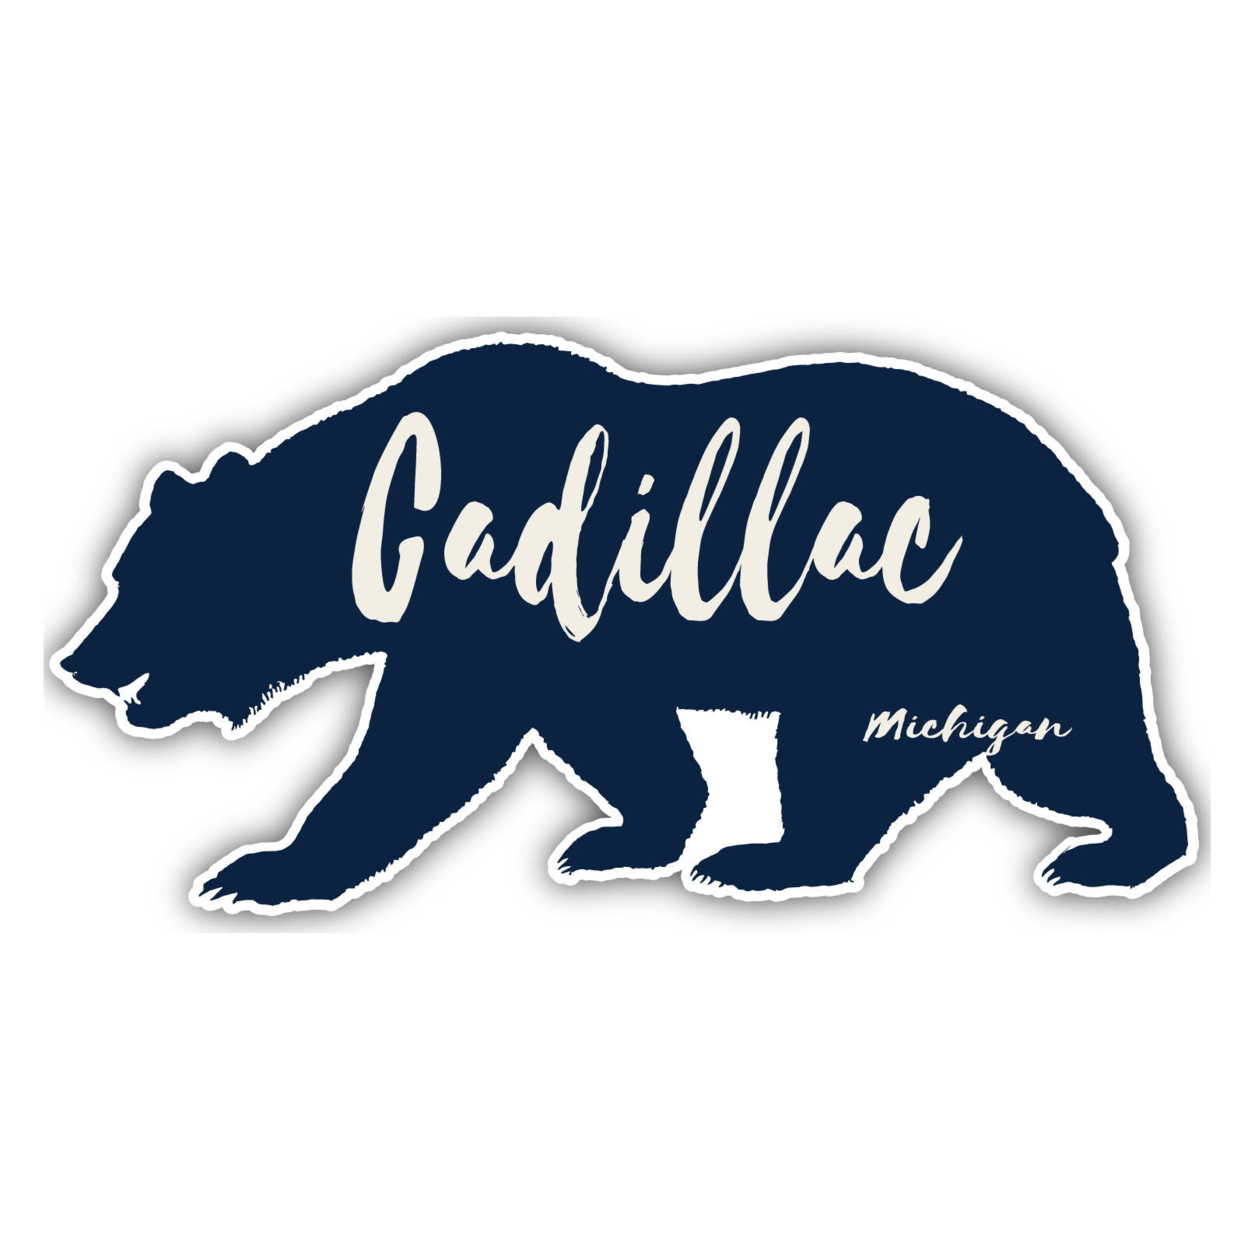 Cadillac Michigan Souvenir Decorative Stickers (Choose Theme And Size) - 4-Pack, 2-Inch, Great Outdoors